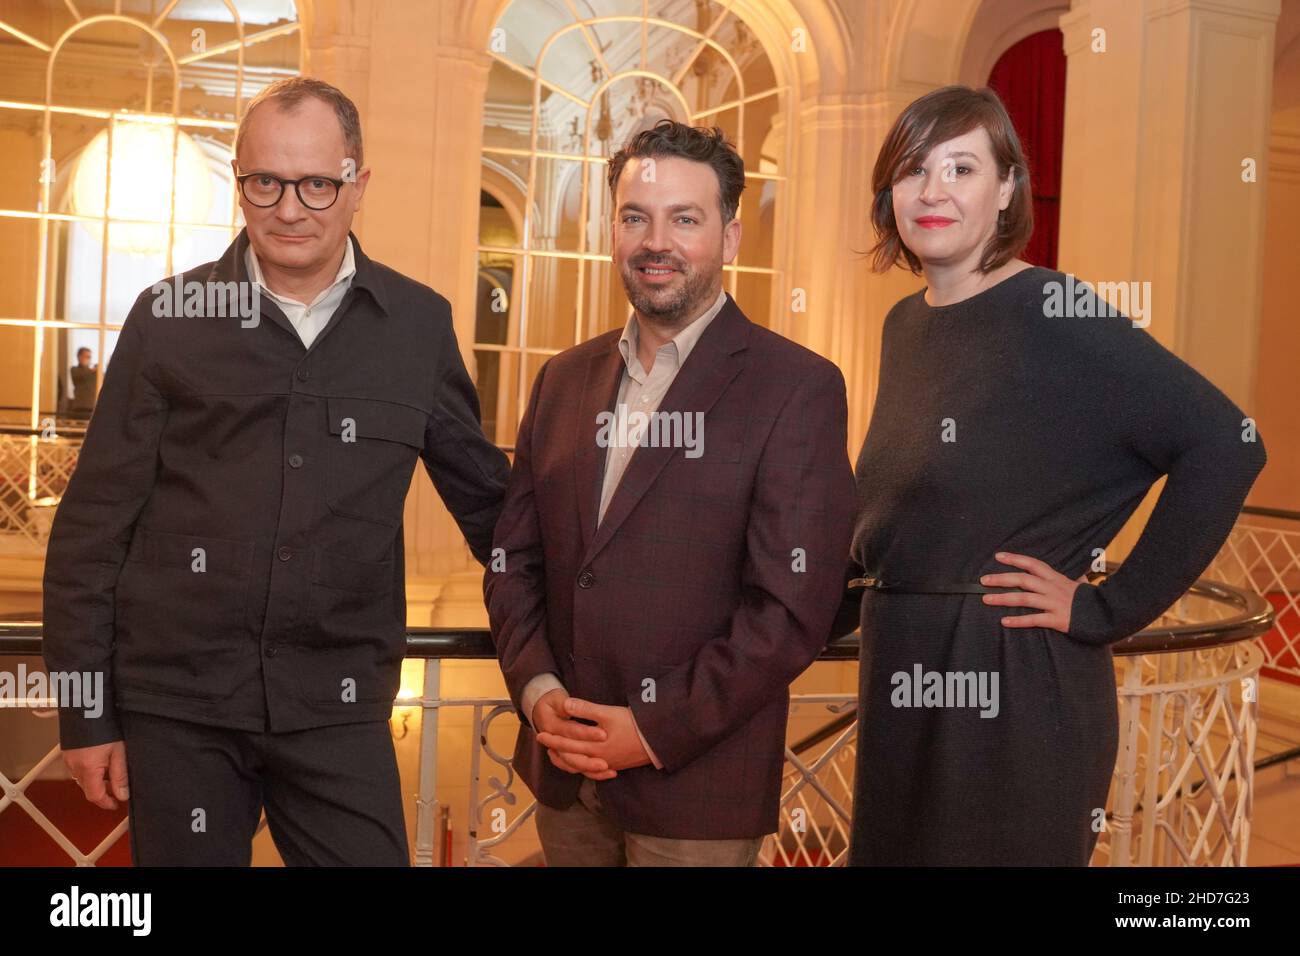 04 January 2022, Berlin: Philip Bröking (l), Opera Director and designated Co-Director, and Susanne Moser (r), Executive Director and designated Co-Director, introduce James Gaffigan as the new General Music Director of the Komische Oper. Gaffigan will assume his new role at the beginning of the 2023/24 season. Photo: Jörg Carstensen/dpa Stock Photo